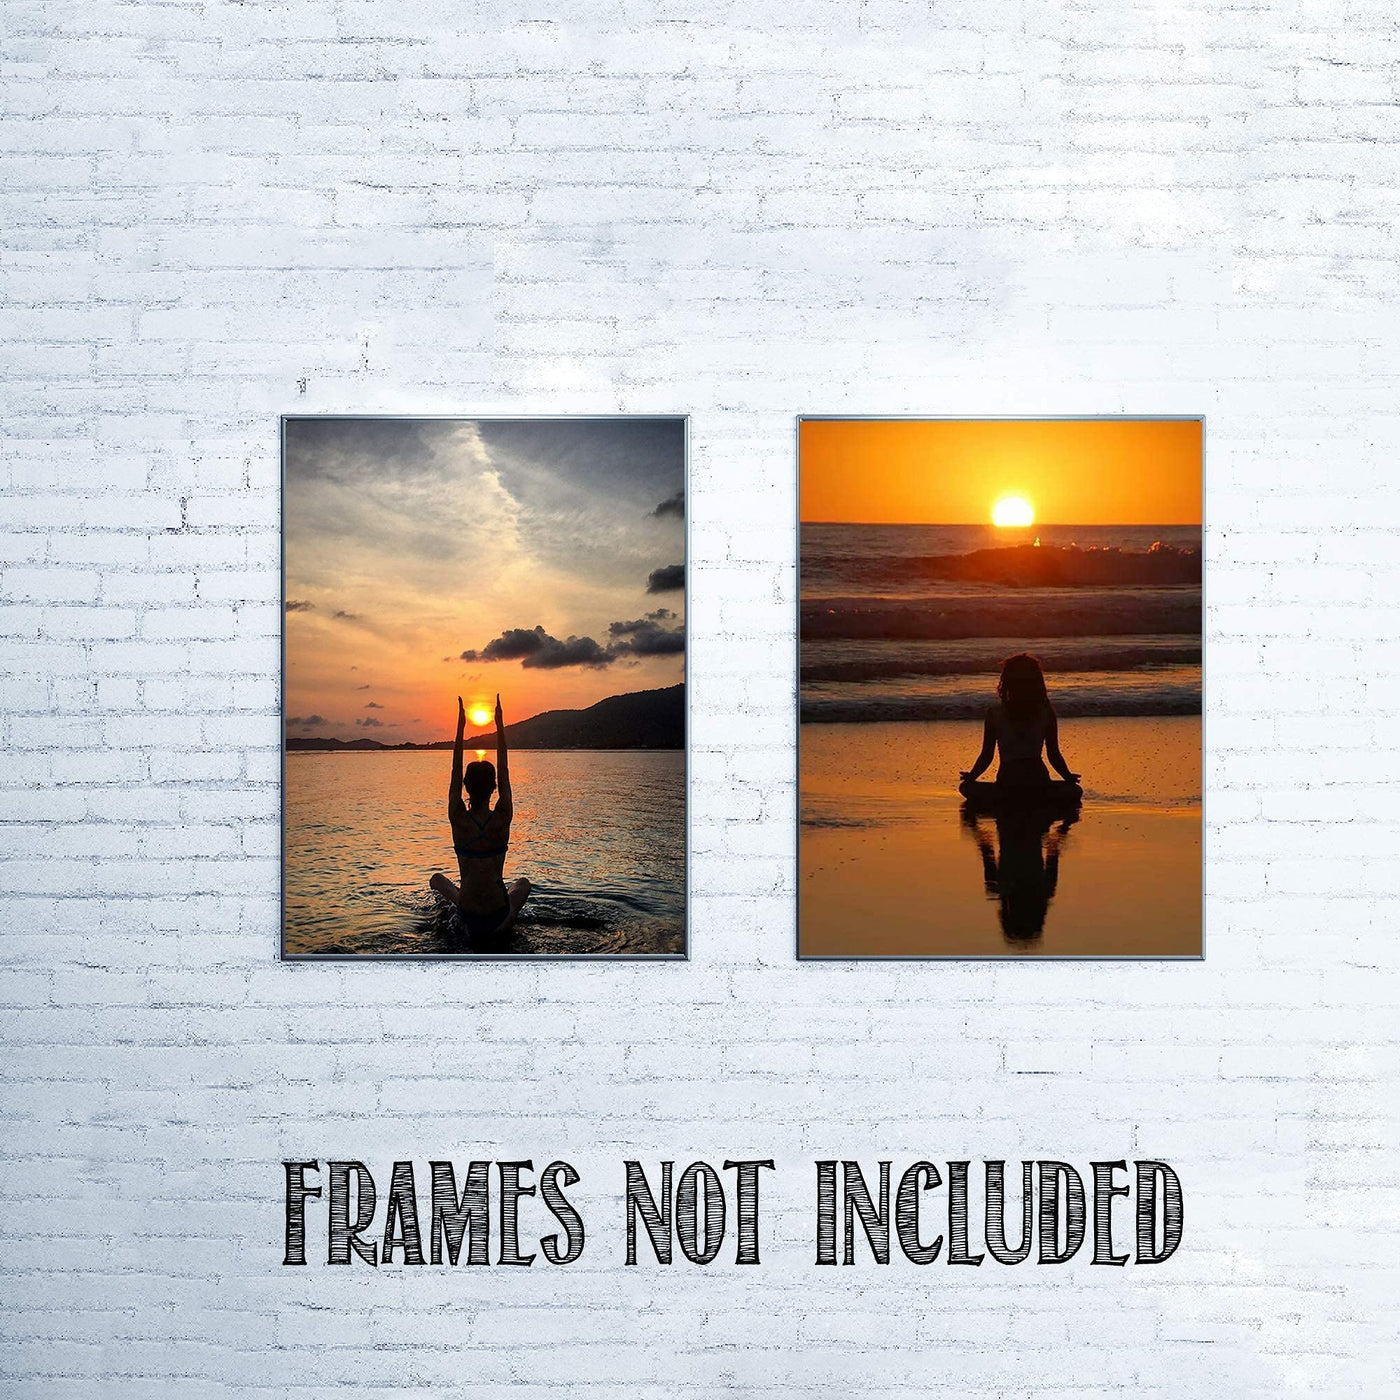 Yoga-Beach Zen at Sunset - 2 Image Set- 8 x 10"s Print Wall Art Ready to Frame. Home D?cor, Office D?cor & Wall Print. Make a Perfect Inspiration Gift for Yoga & Beach Lovers